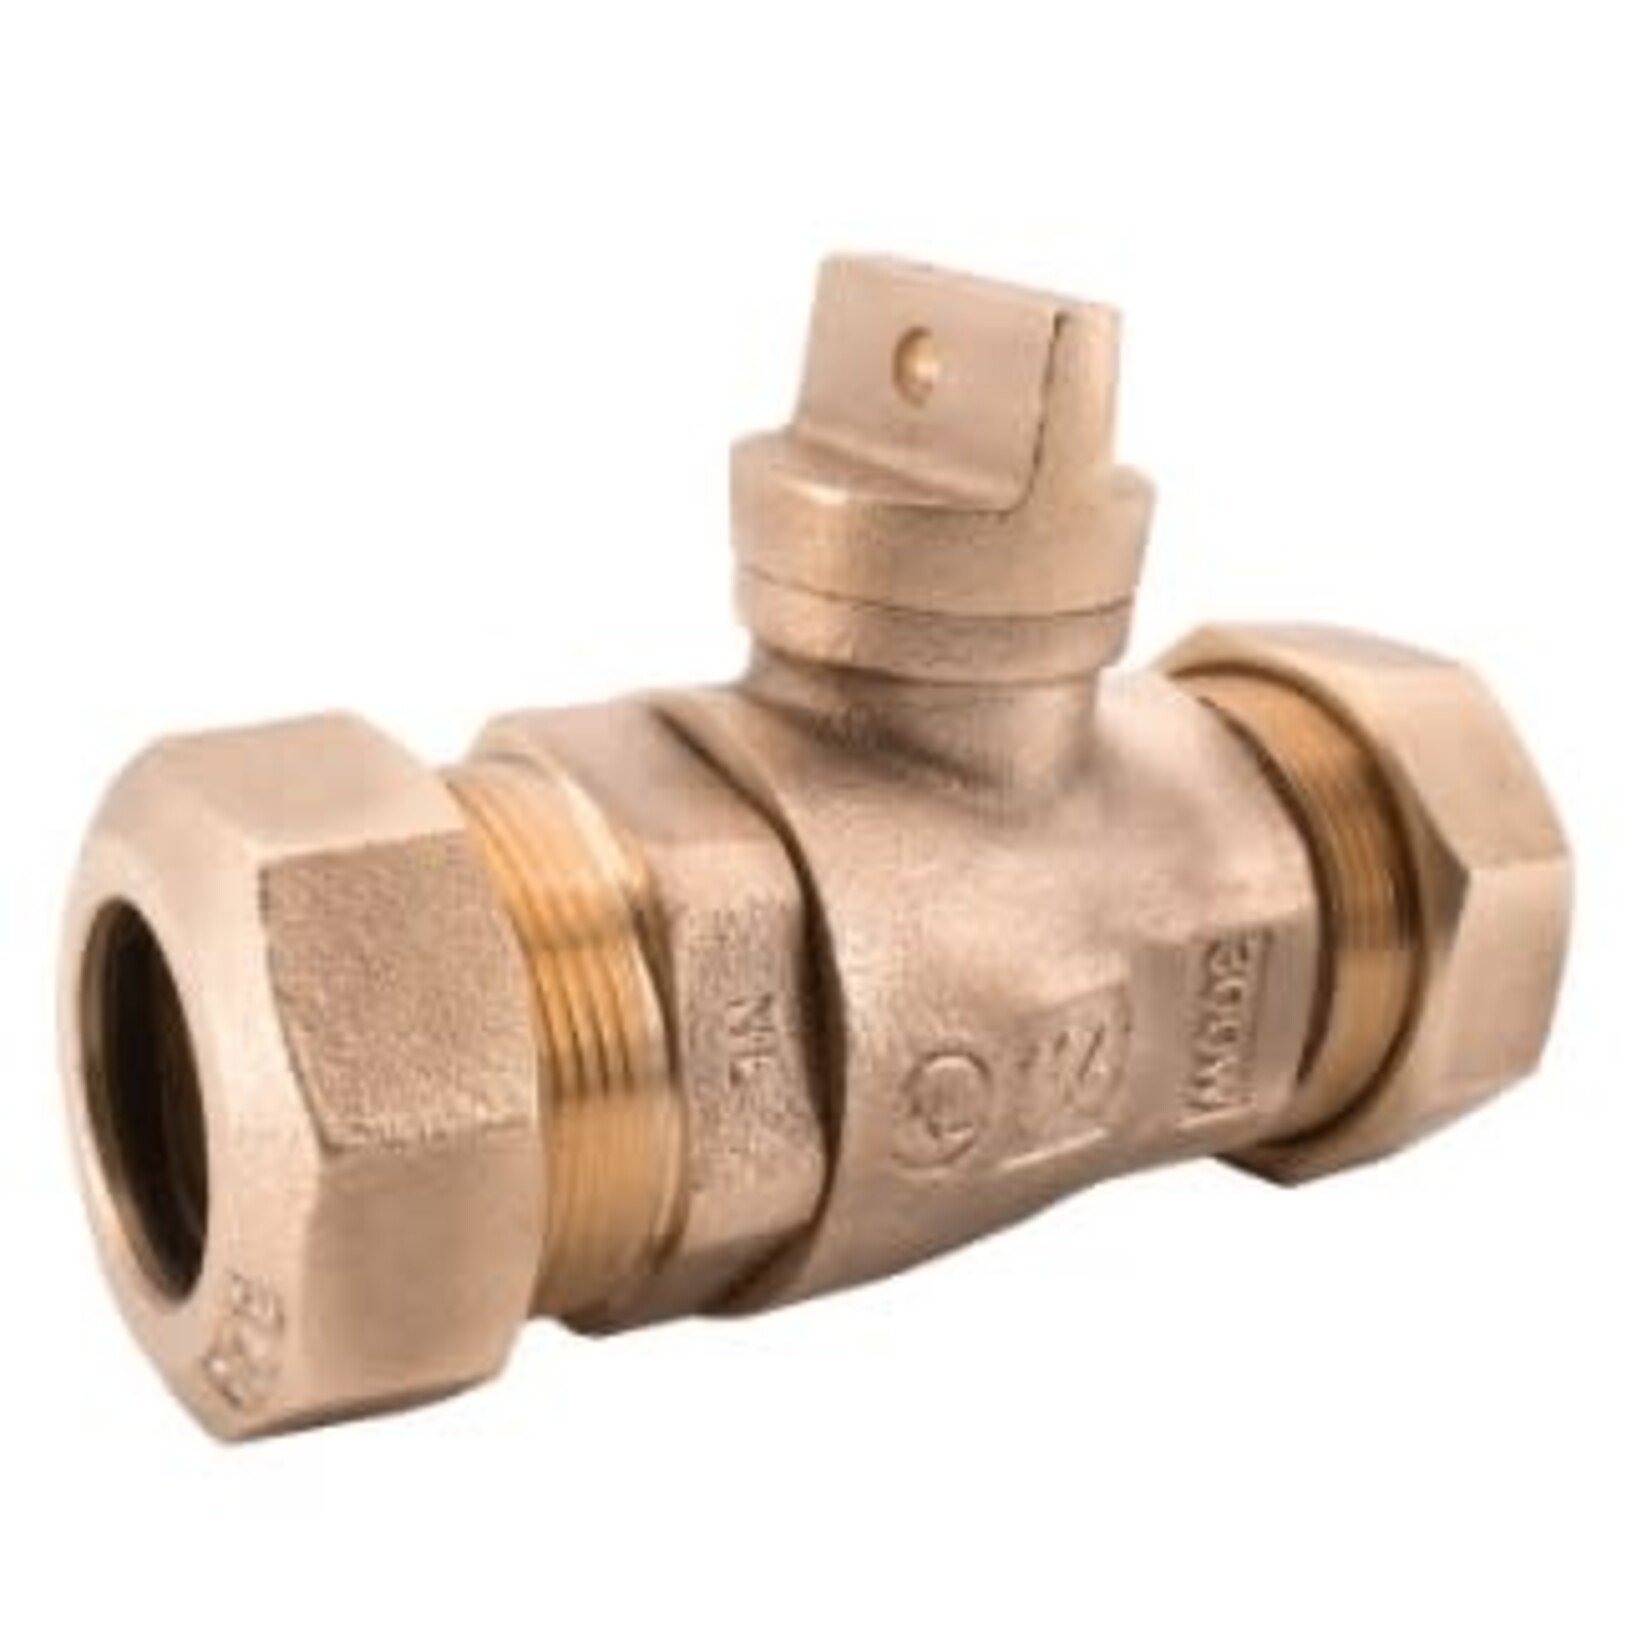 LEGEND VALVE 3/4 IN BRASS RING COMPRESSION COUPLING (CTS)